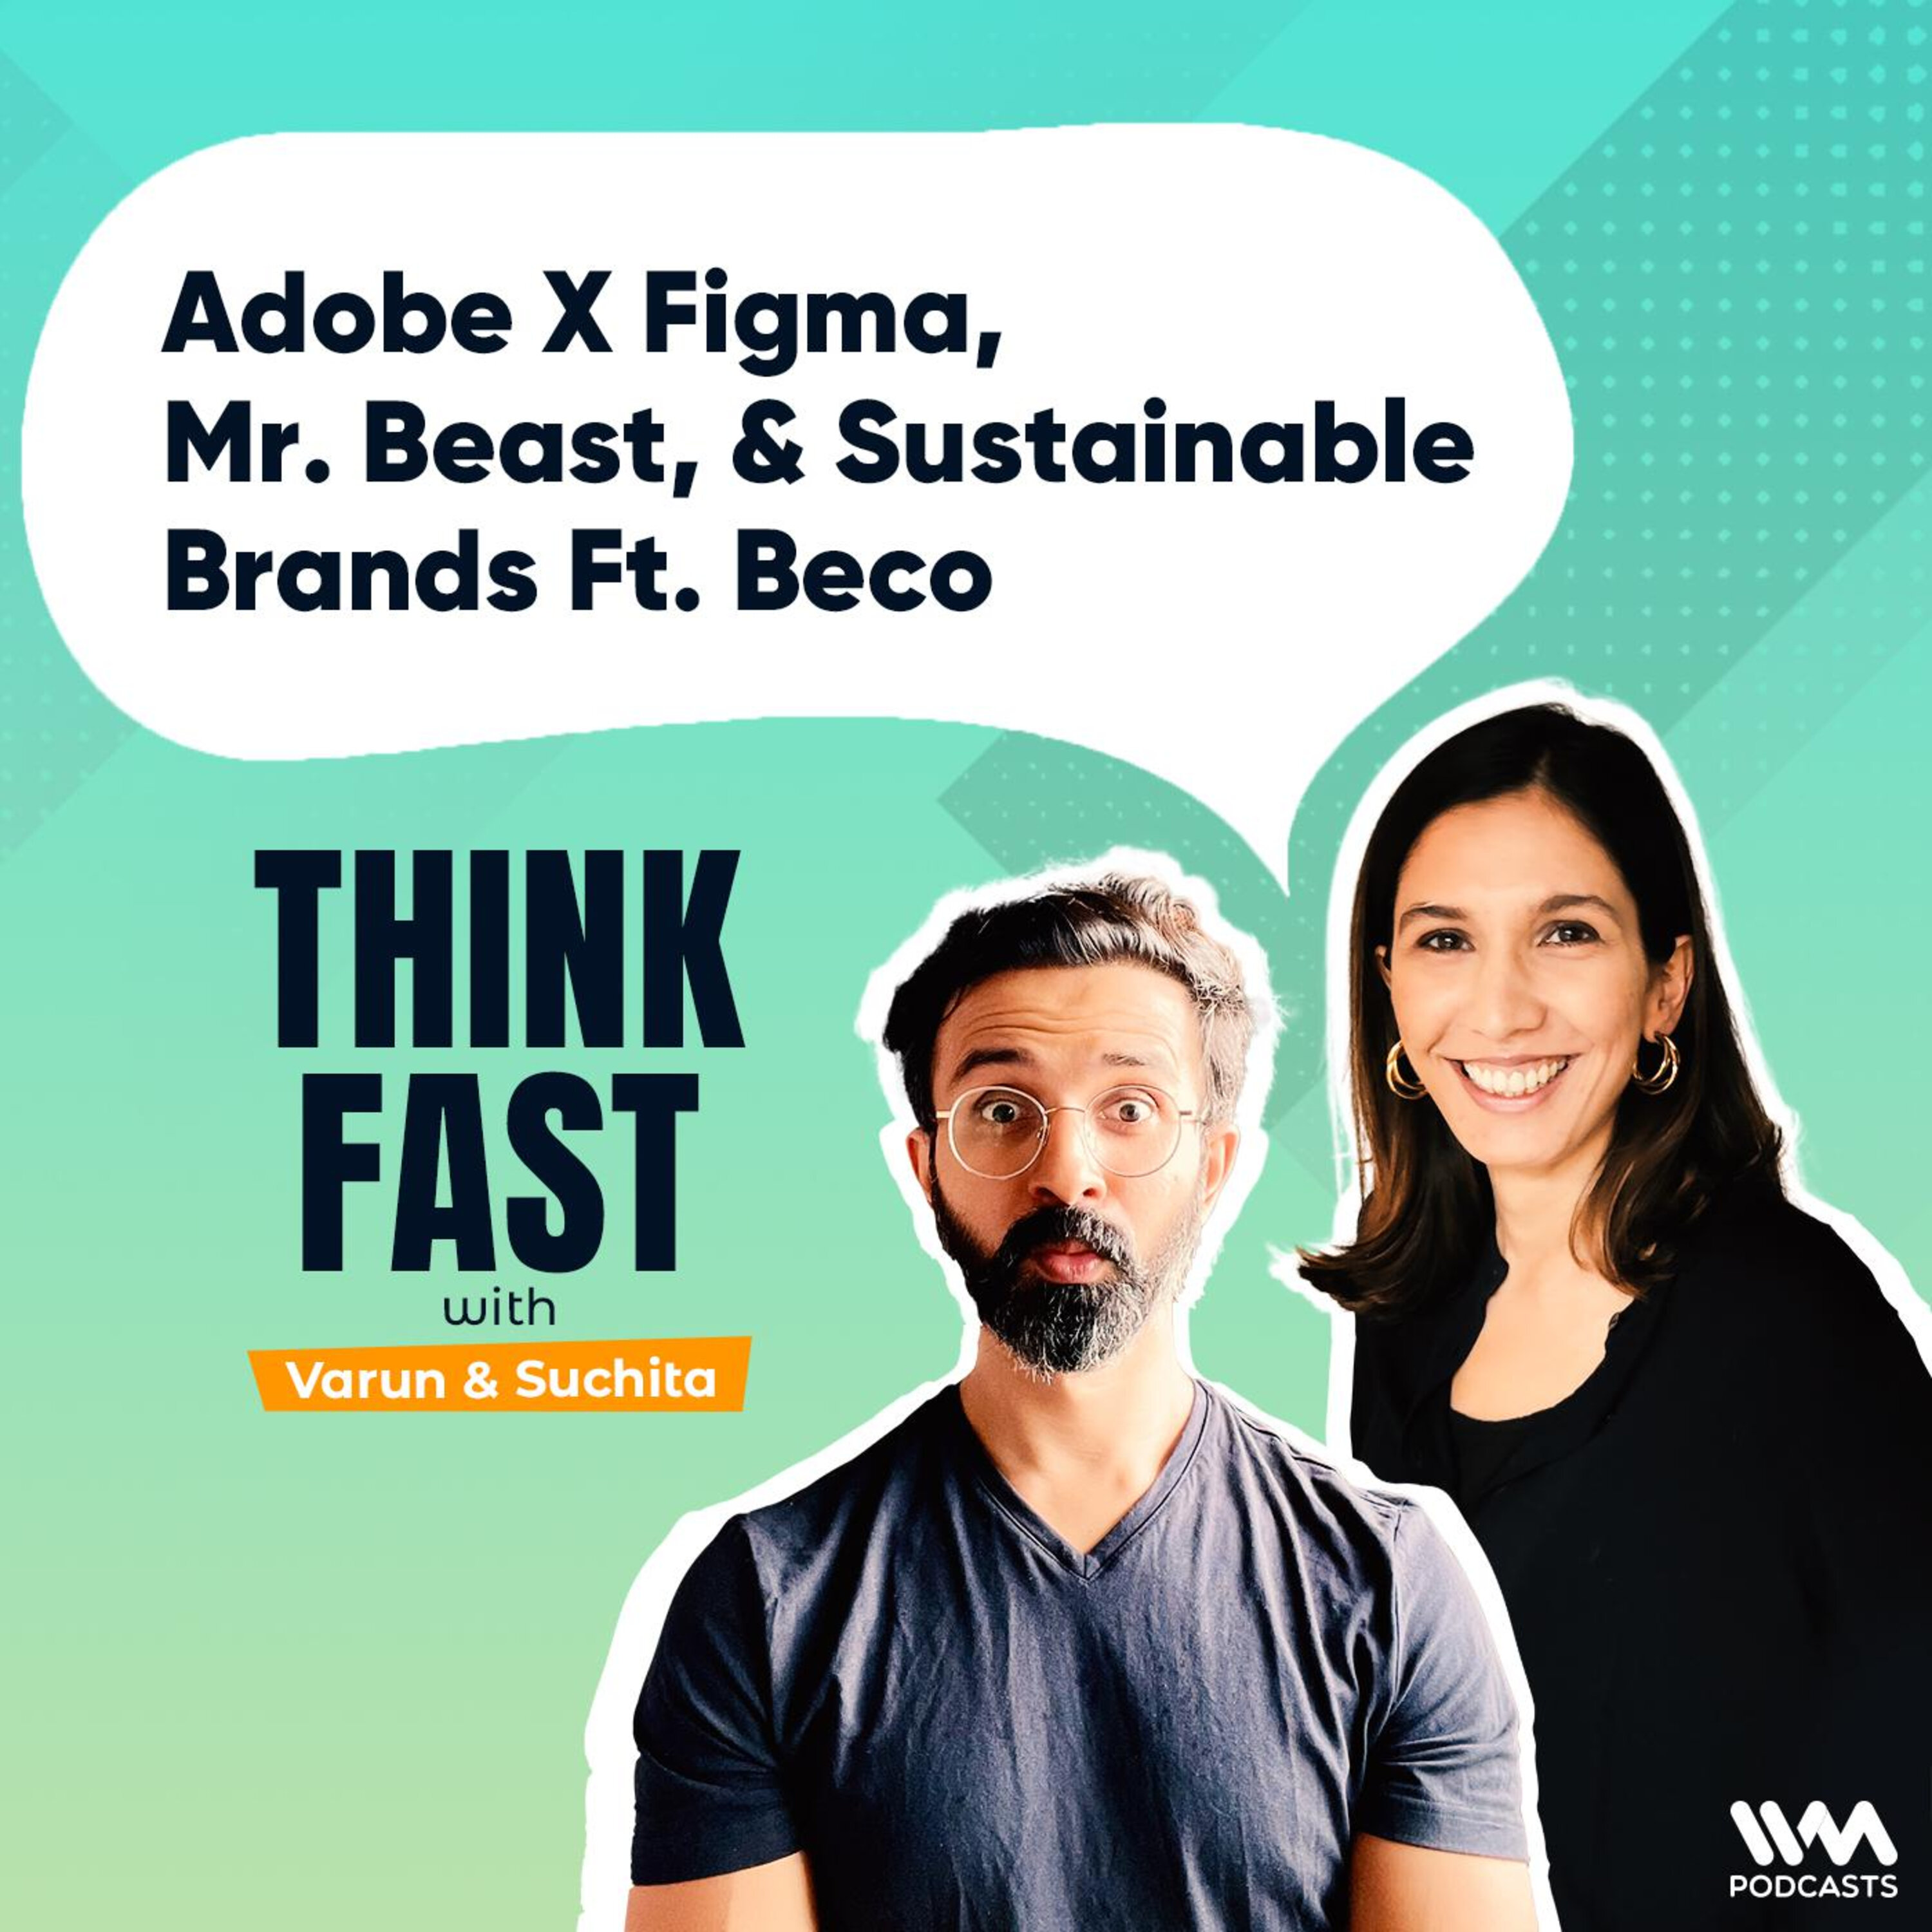 Adobe X Figma, Mr. Beast, & Sustainable Brands ft. Beco